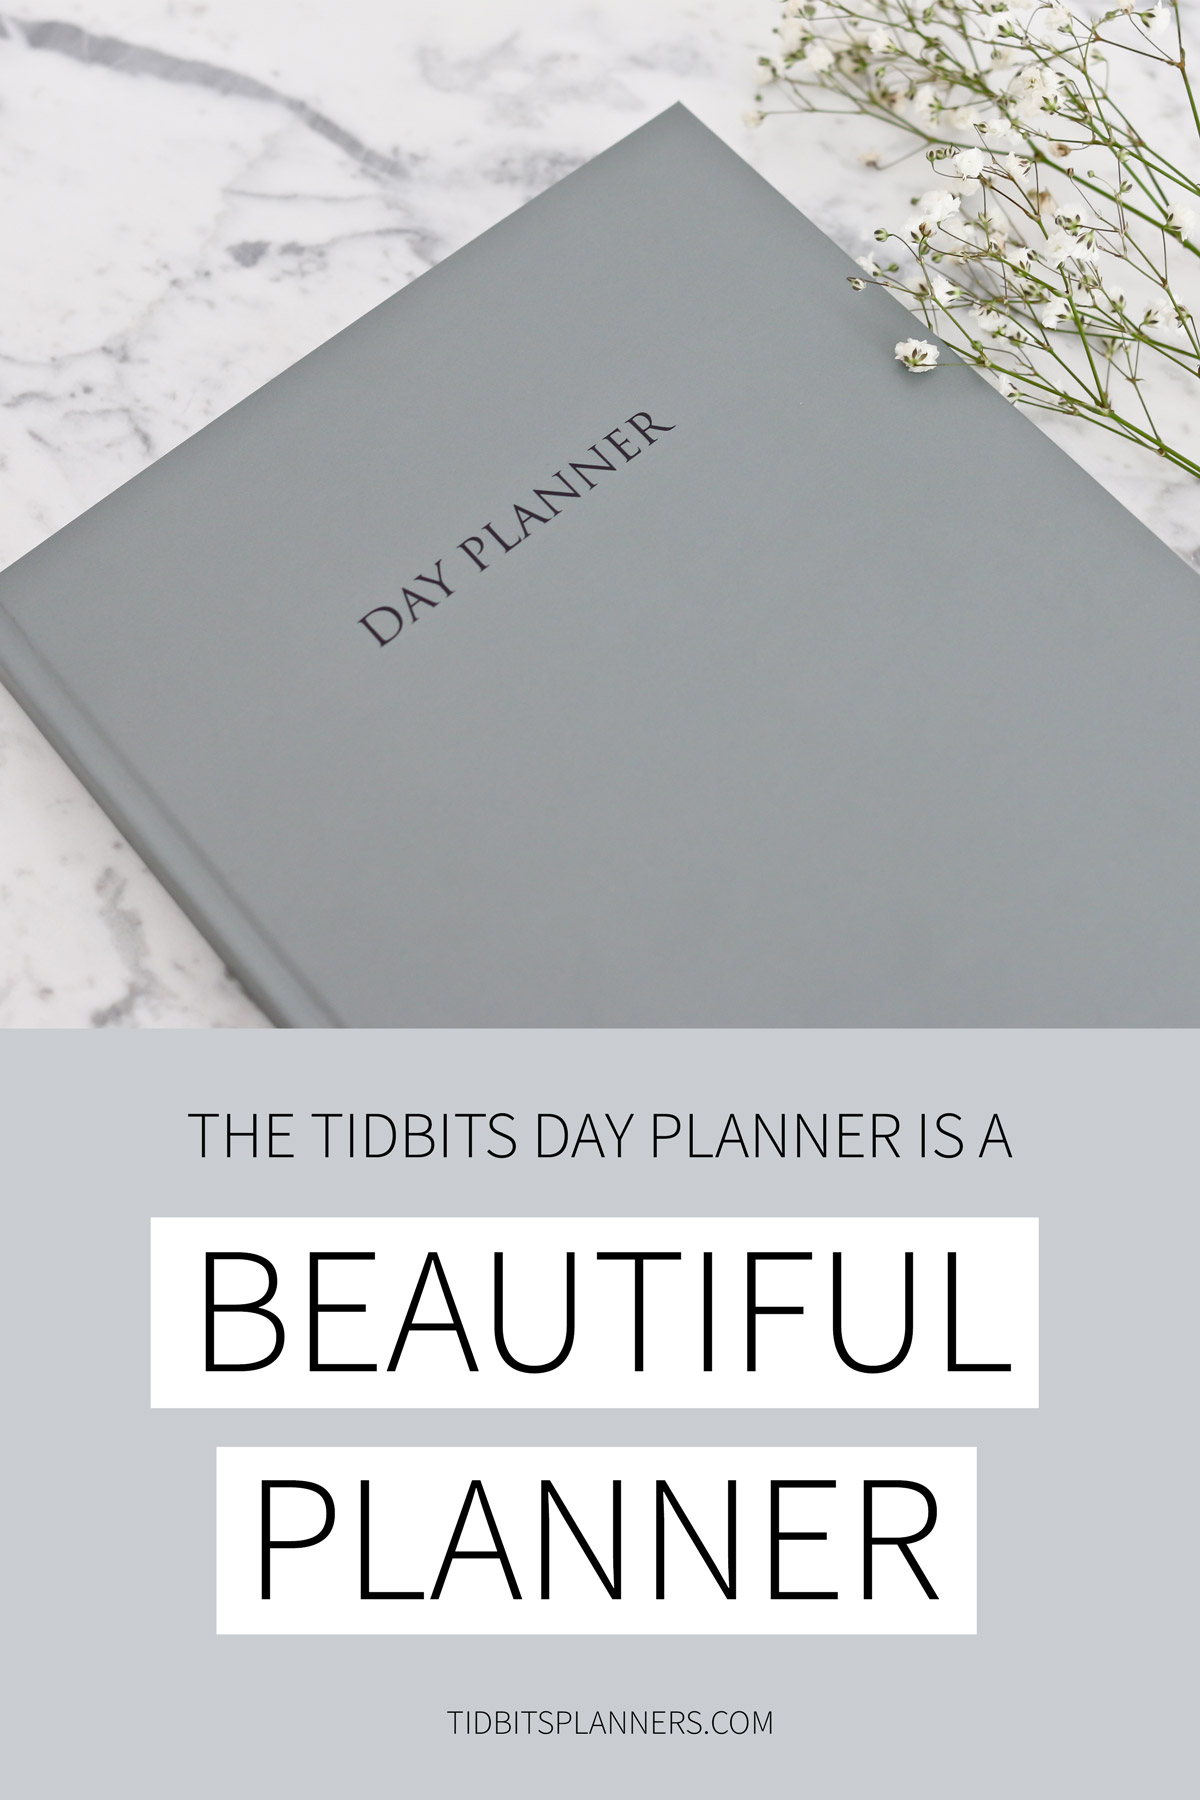 A BEAUTIFUL PLANNER